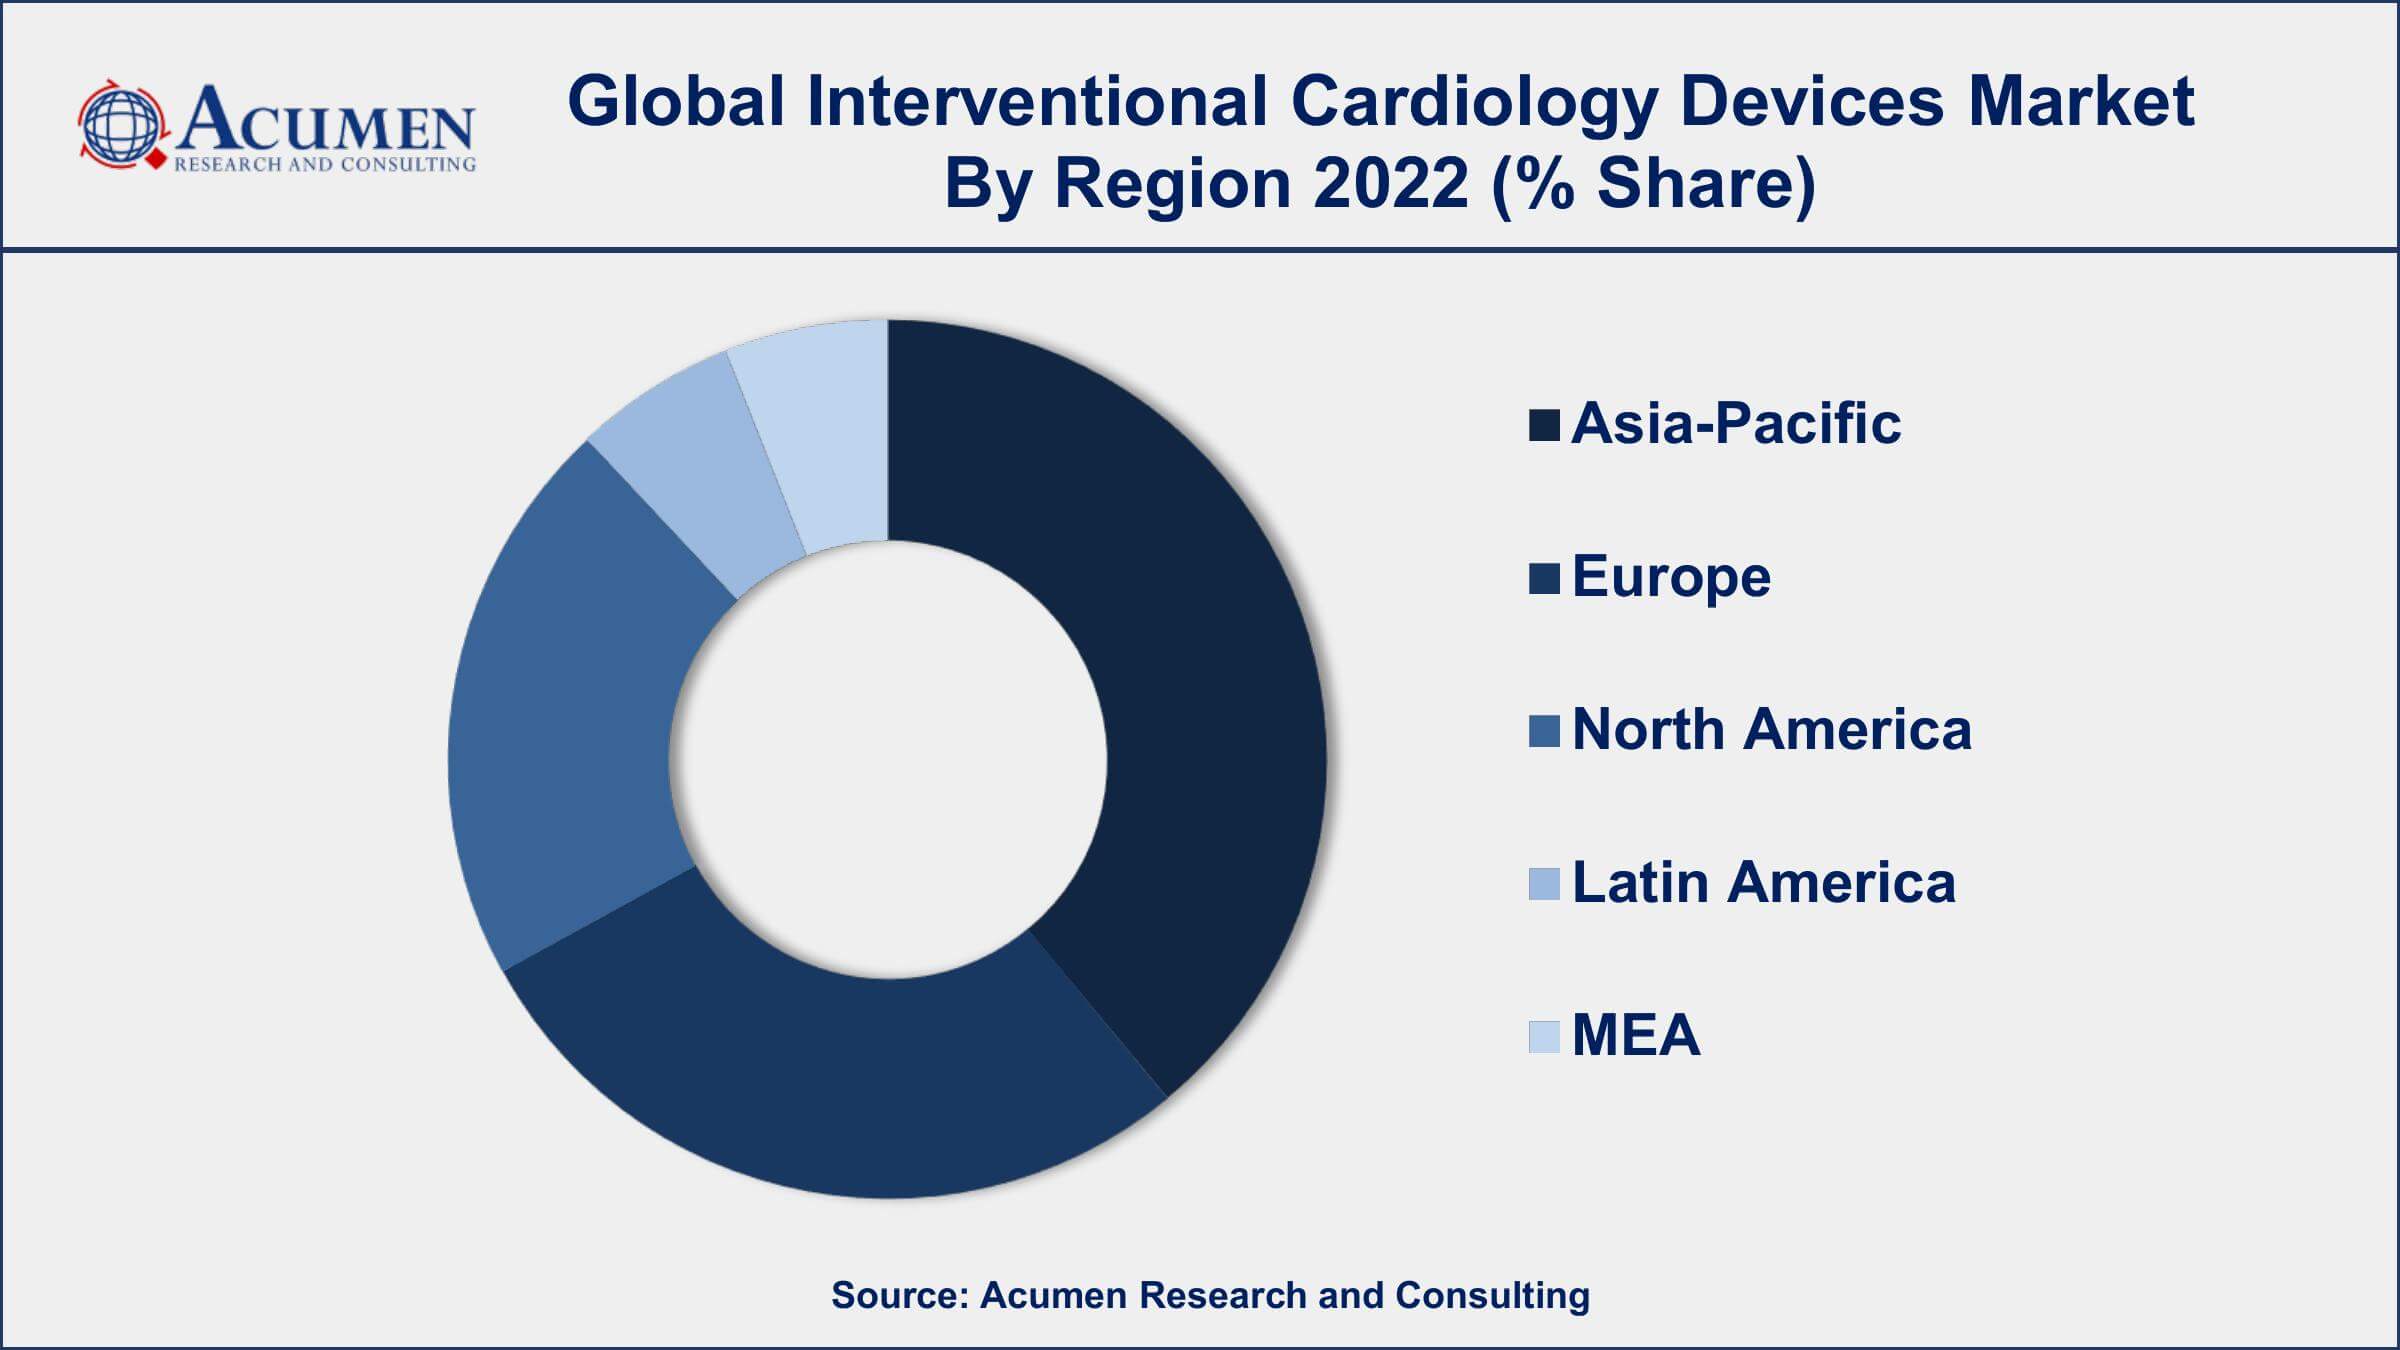 Interventional Cardiology Devices Market Drivers